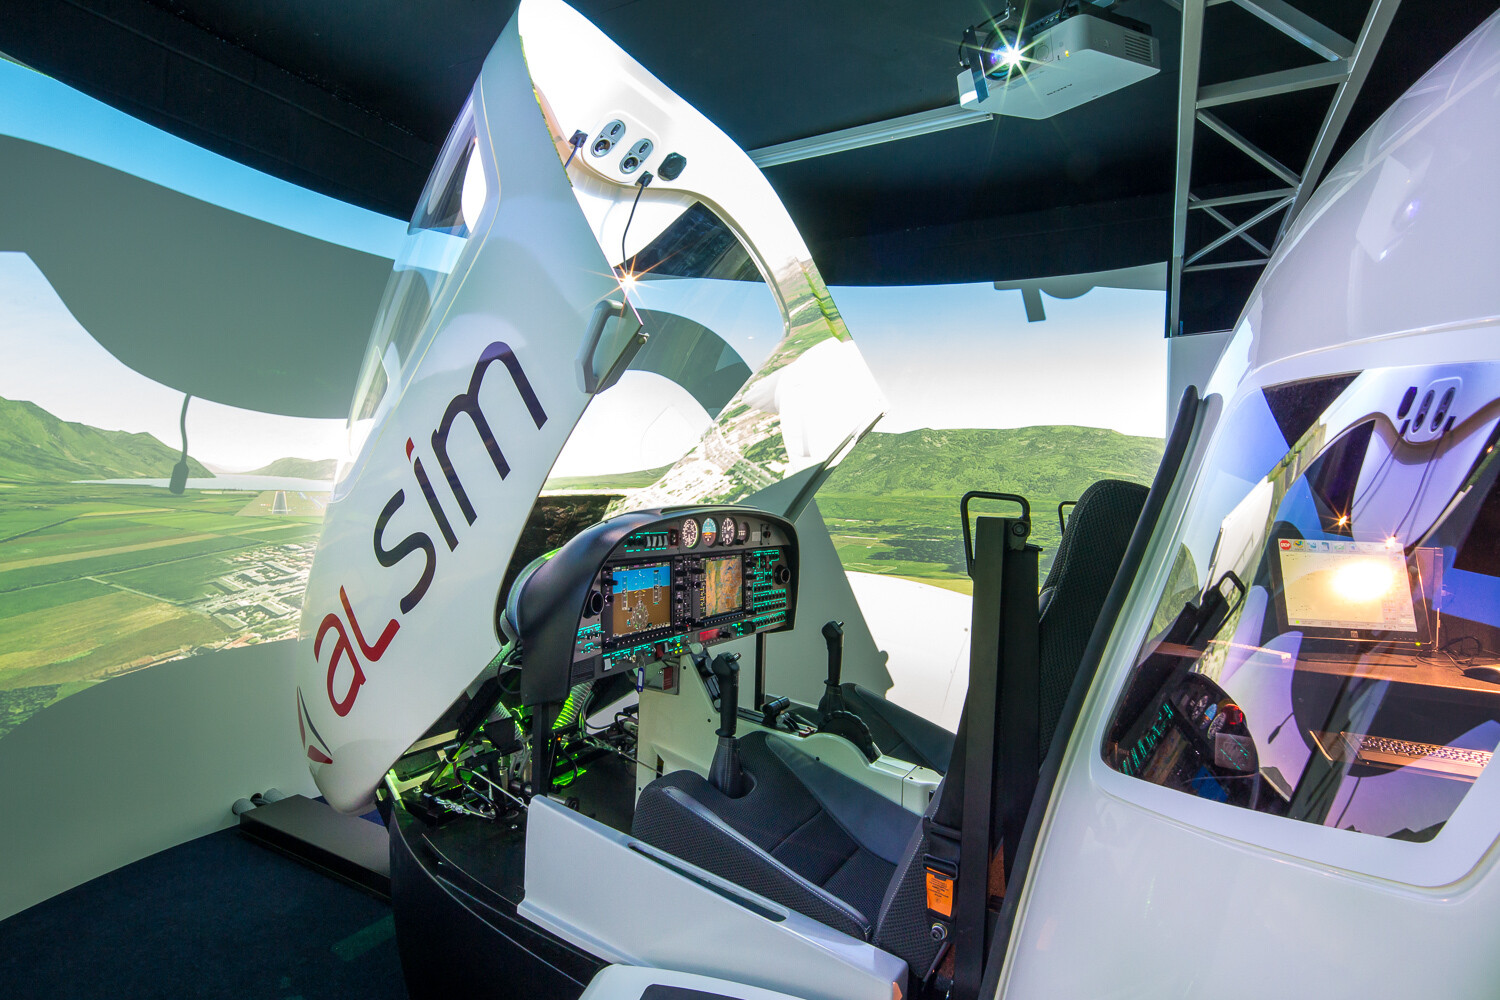 Perth Airport Flight Simulator Experience for One